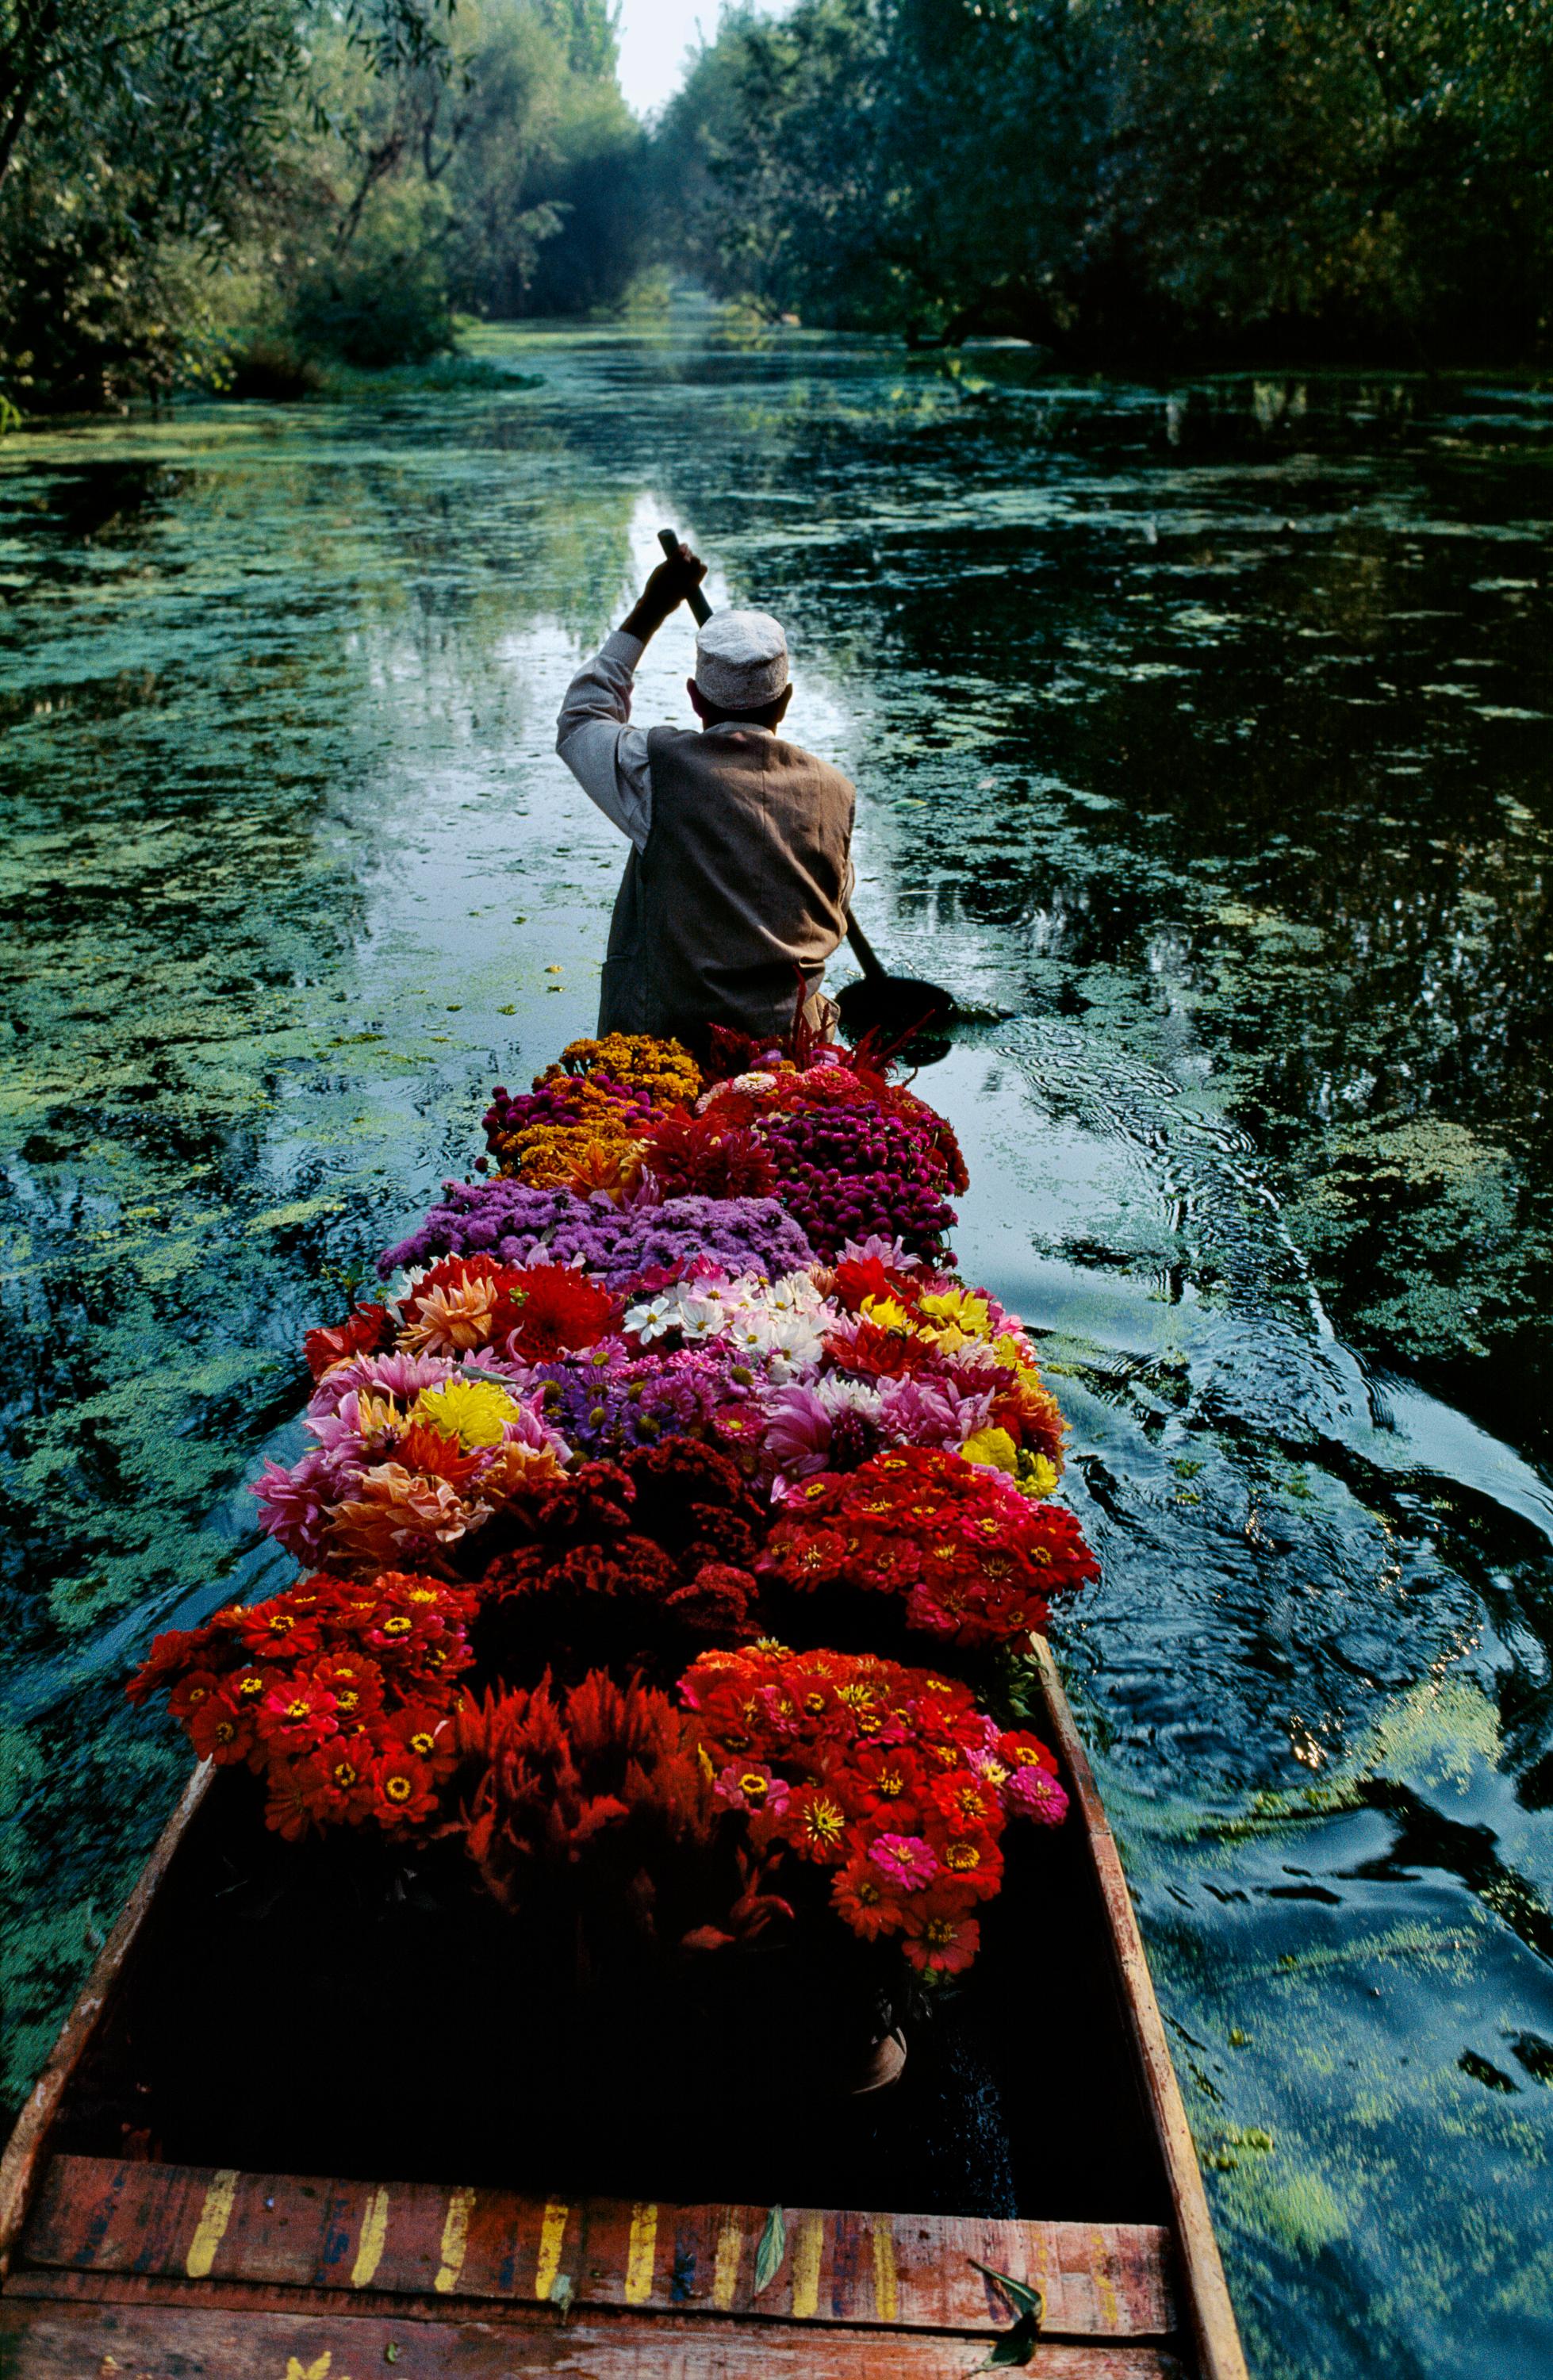 Flower Seller, Dal Lake, Srinigar, Kashmir, 1996 - Steve McCurry 
Signed and affixed with photographer's edition label and numbered on reverse
Digital c-type print

20 x 24 inches, edition of 90
24 x 30 inches, edition of 75
48 x 72 inches, edition